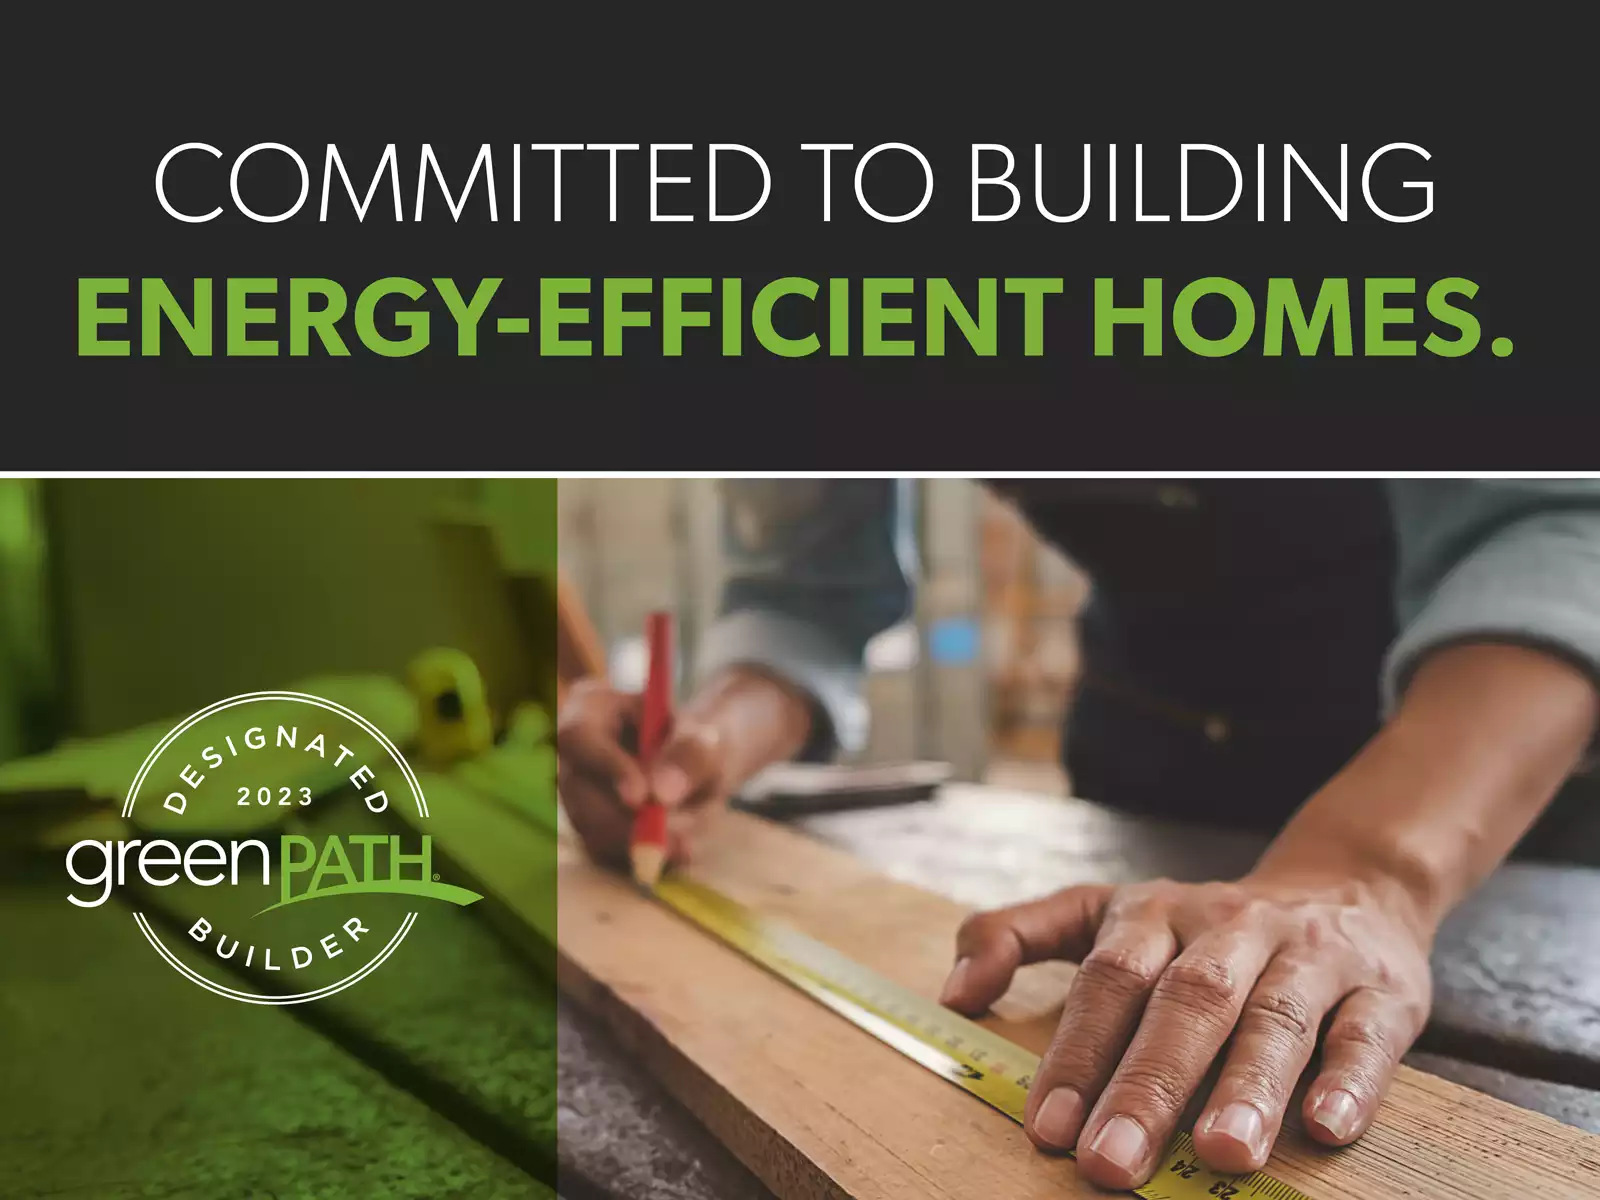 Committed to building energy efficient homes. Designated GreenPath Builder